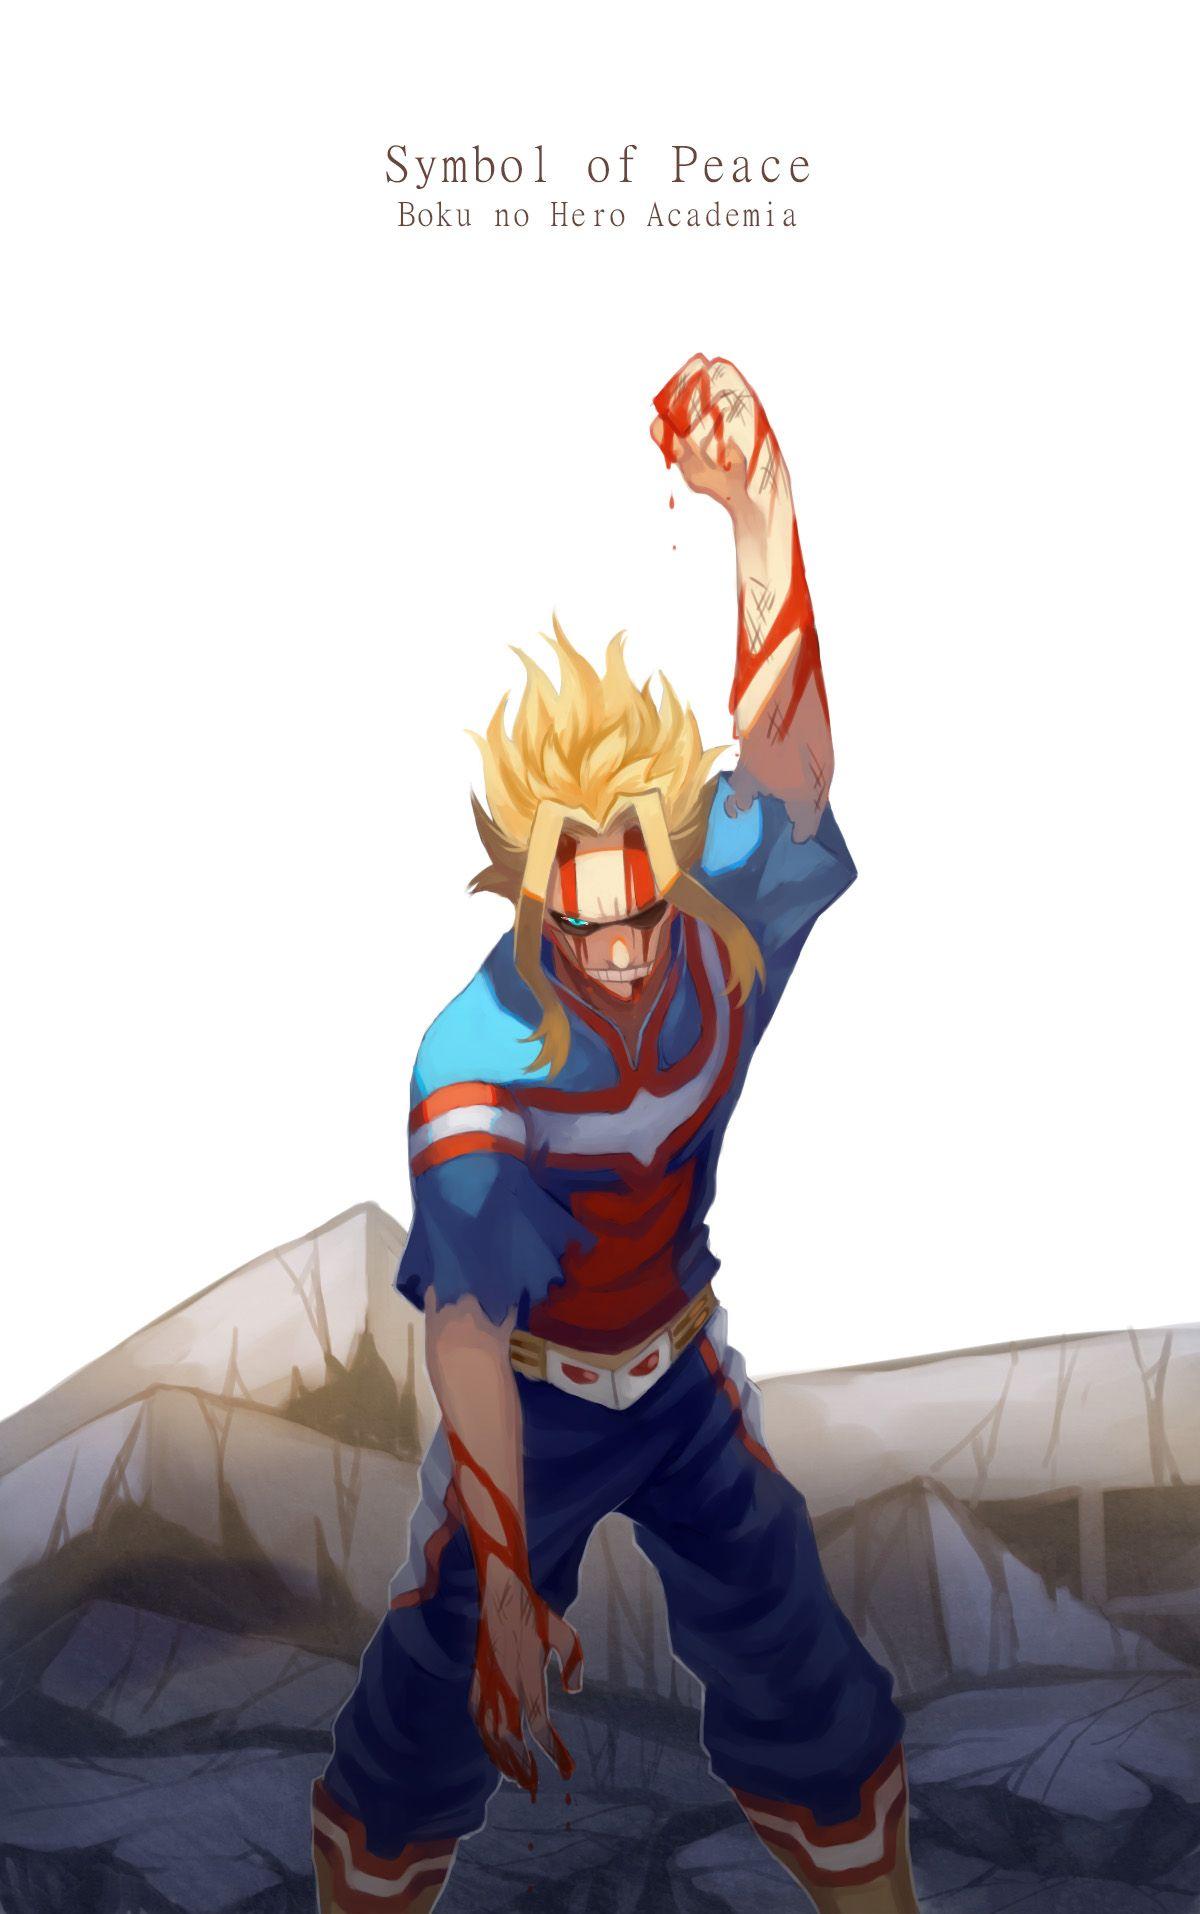 Mobile wallpaper Anime My Hero Academia All Might Toshinori Yagi  440660 download the picture for free